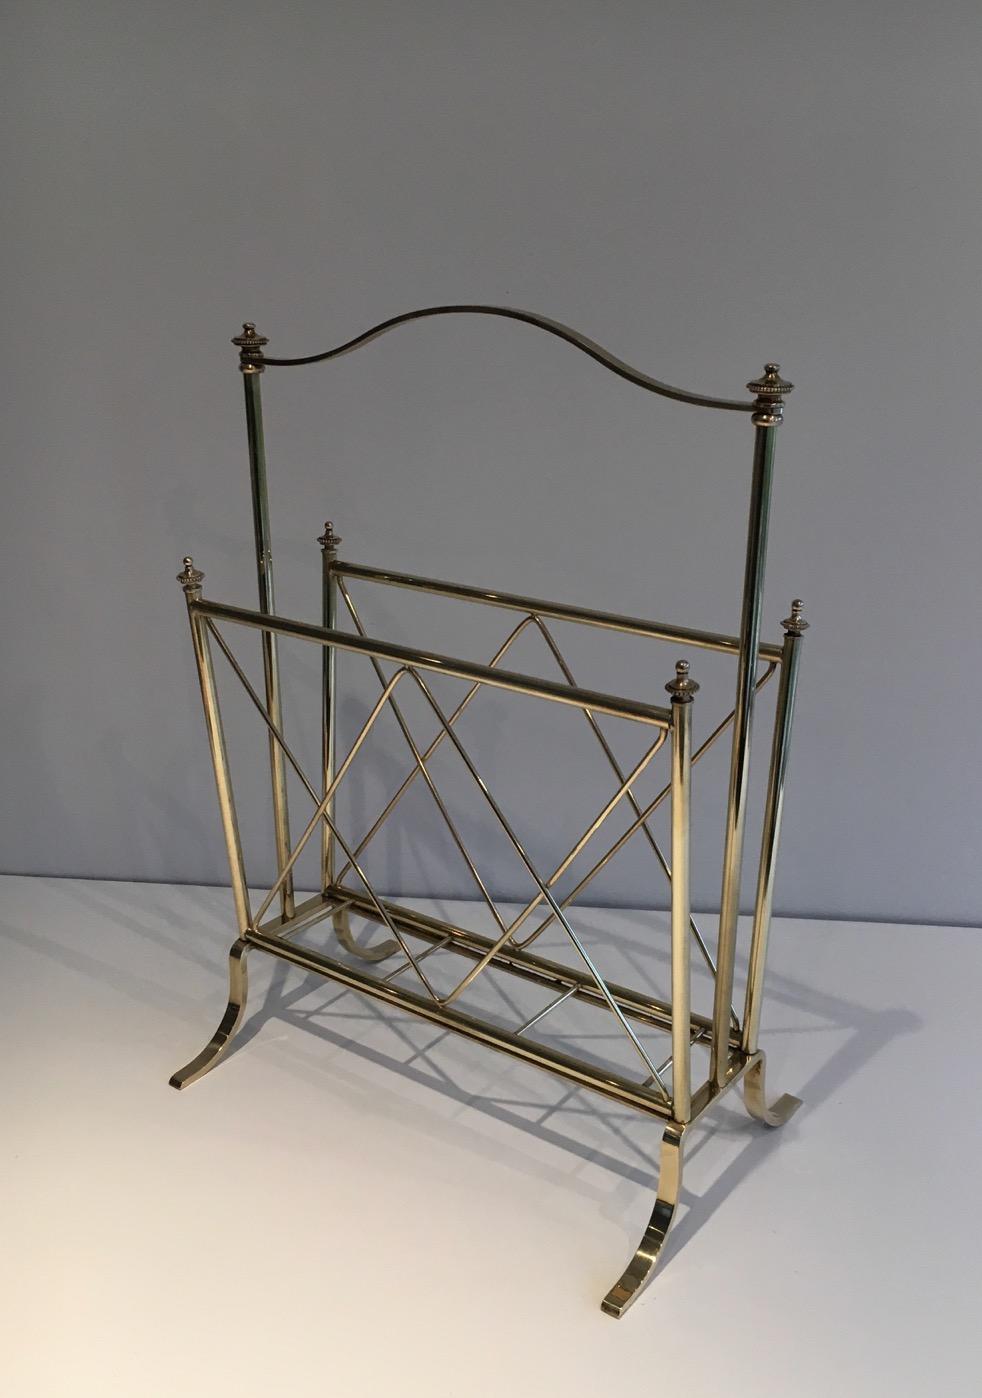 This neoclassical stye magazine rack is made of brass. This is a French work attributed to famous French designer Maison Jansen. Circa 1940.